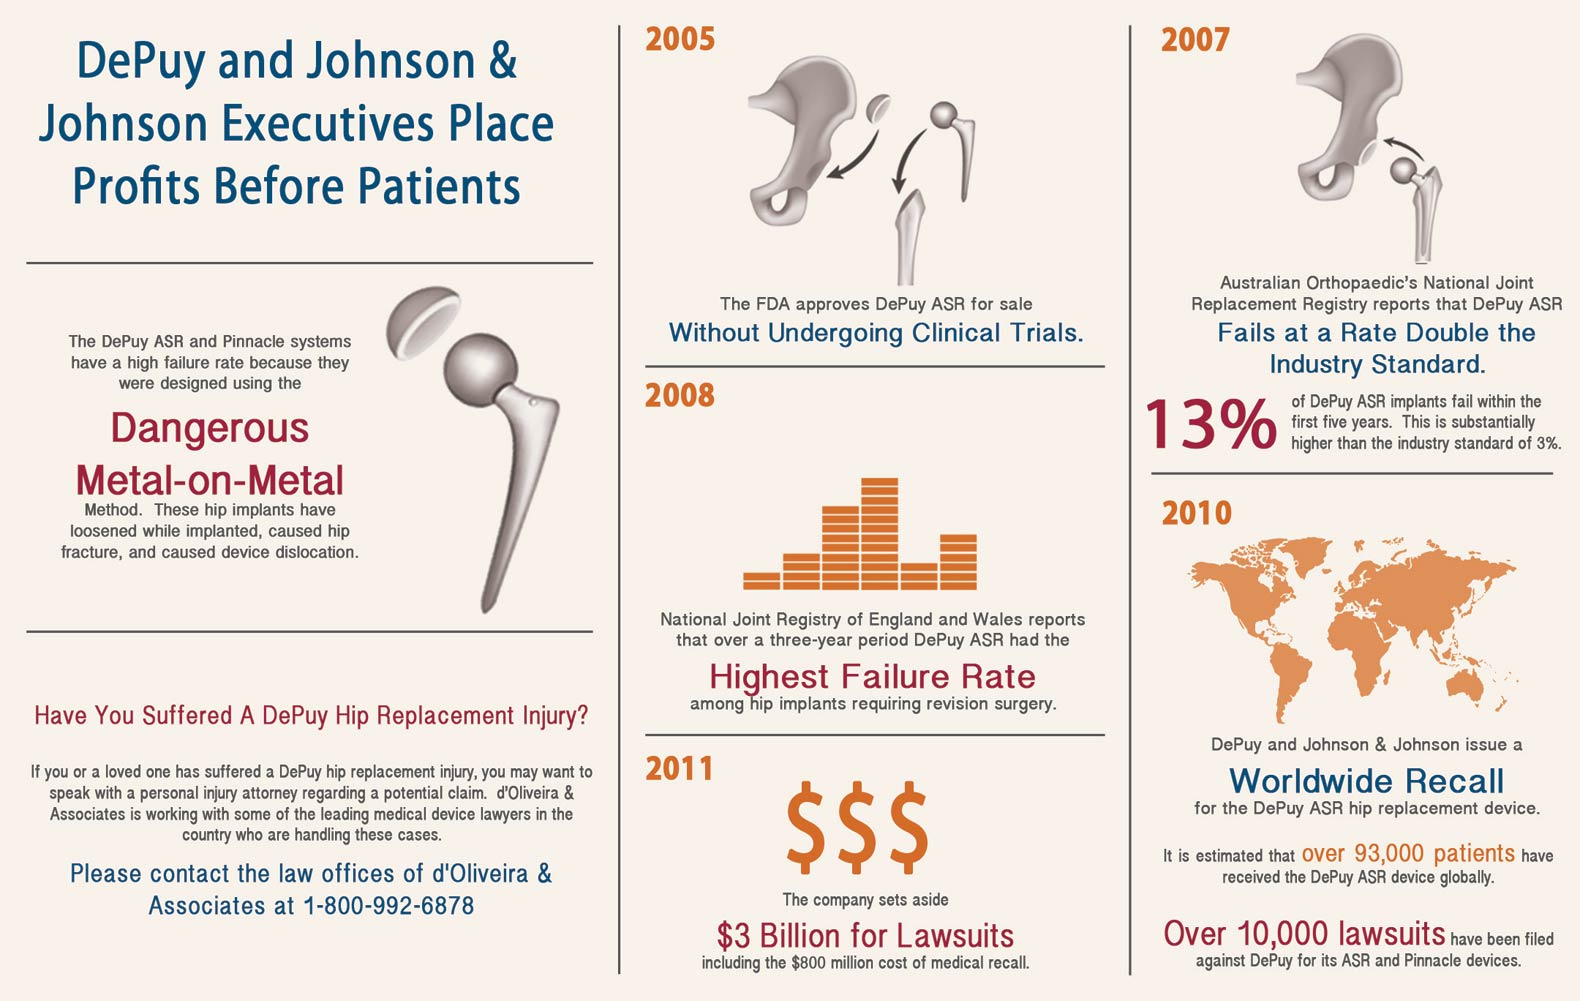 depuy hip replacement infographic details how DePuy misleads the public